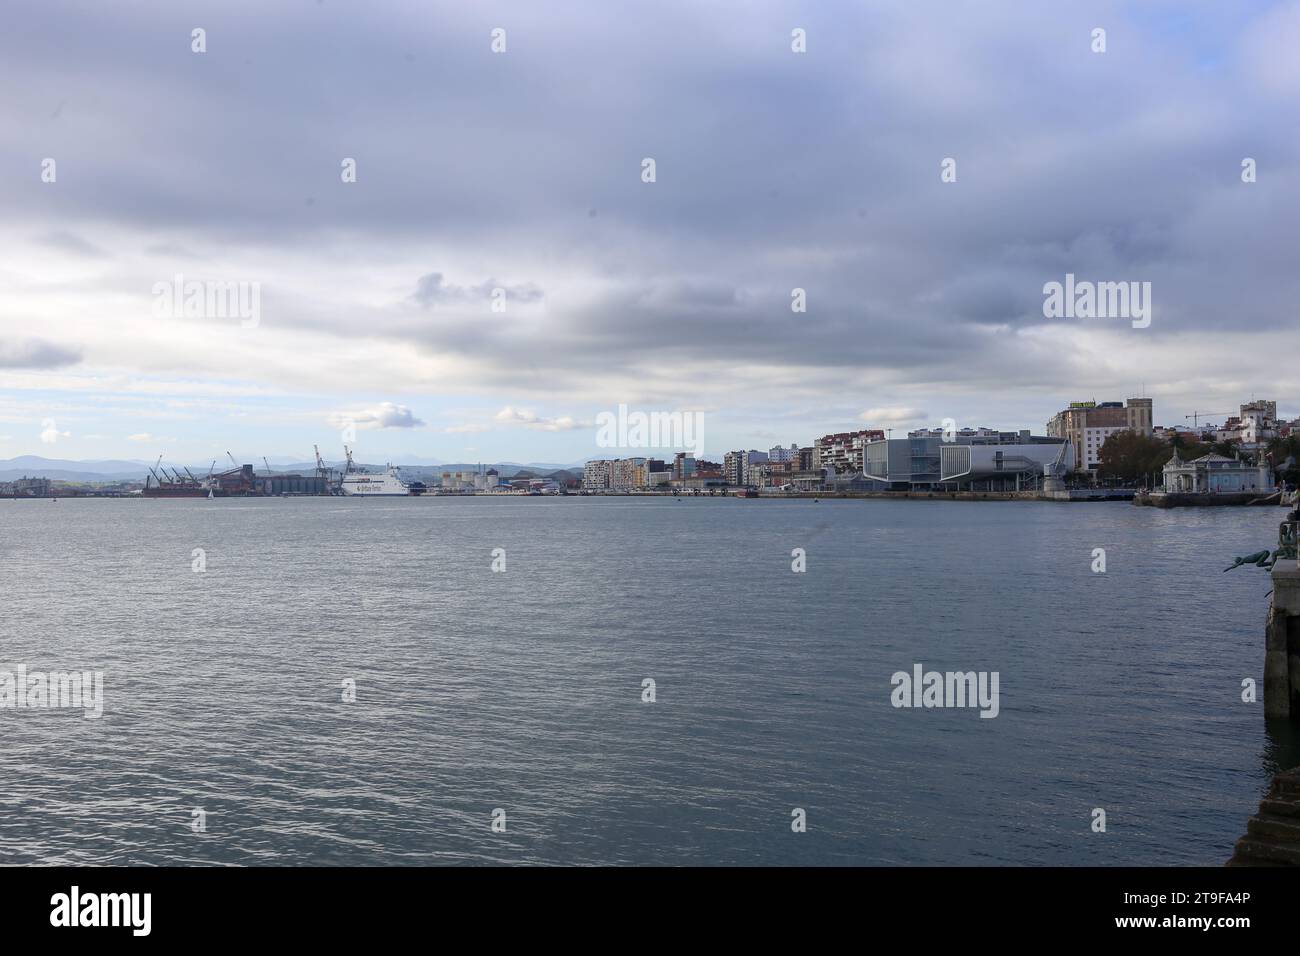 Santander, Spain, November 25th, 2023: View of the Santander to Pourtsmouth Ferry Pier (L) and the Botín Center (R) during Daily Life in Santander, on November 25, 2023, in Santander, Spain. Credit: Alberto Brevers / Alamy Live News. Stock Photo